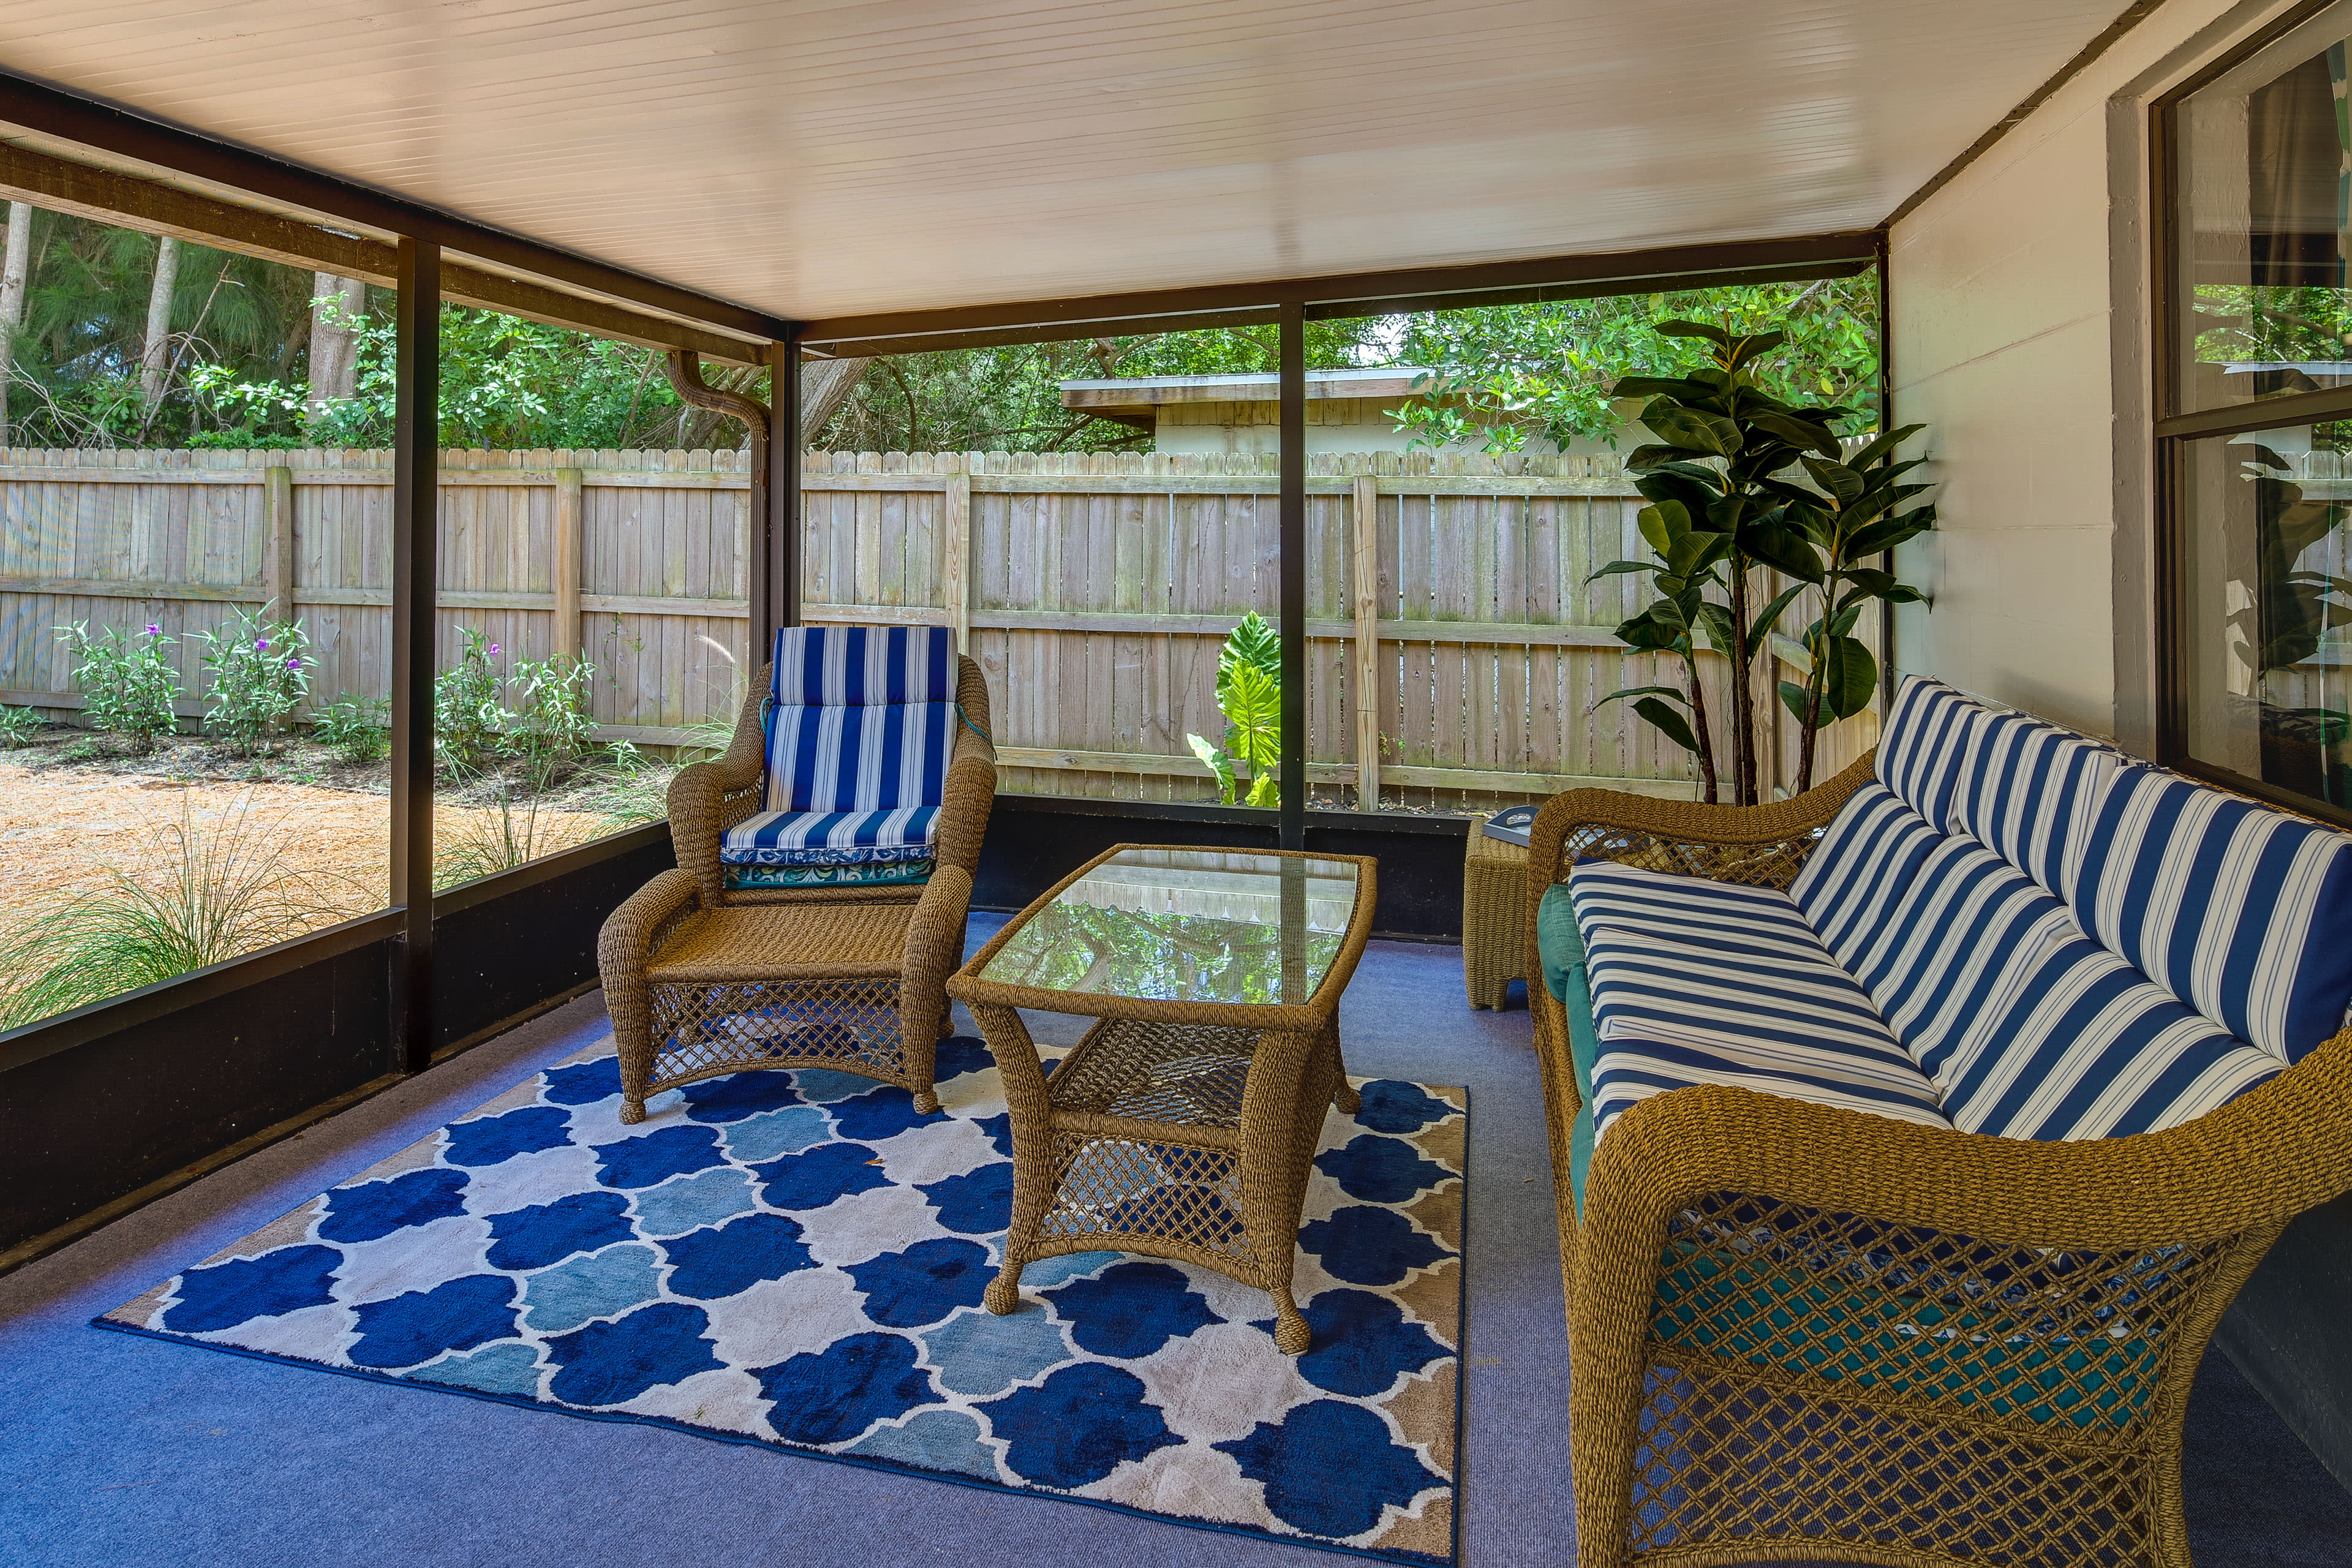 Screened-In Patio | Putting Green Mat | Outdoor Seating & Dining